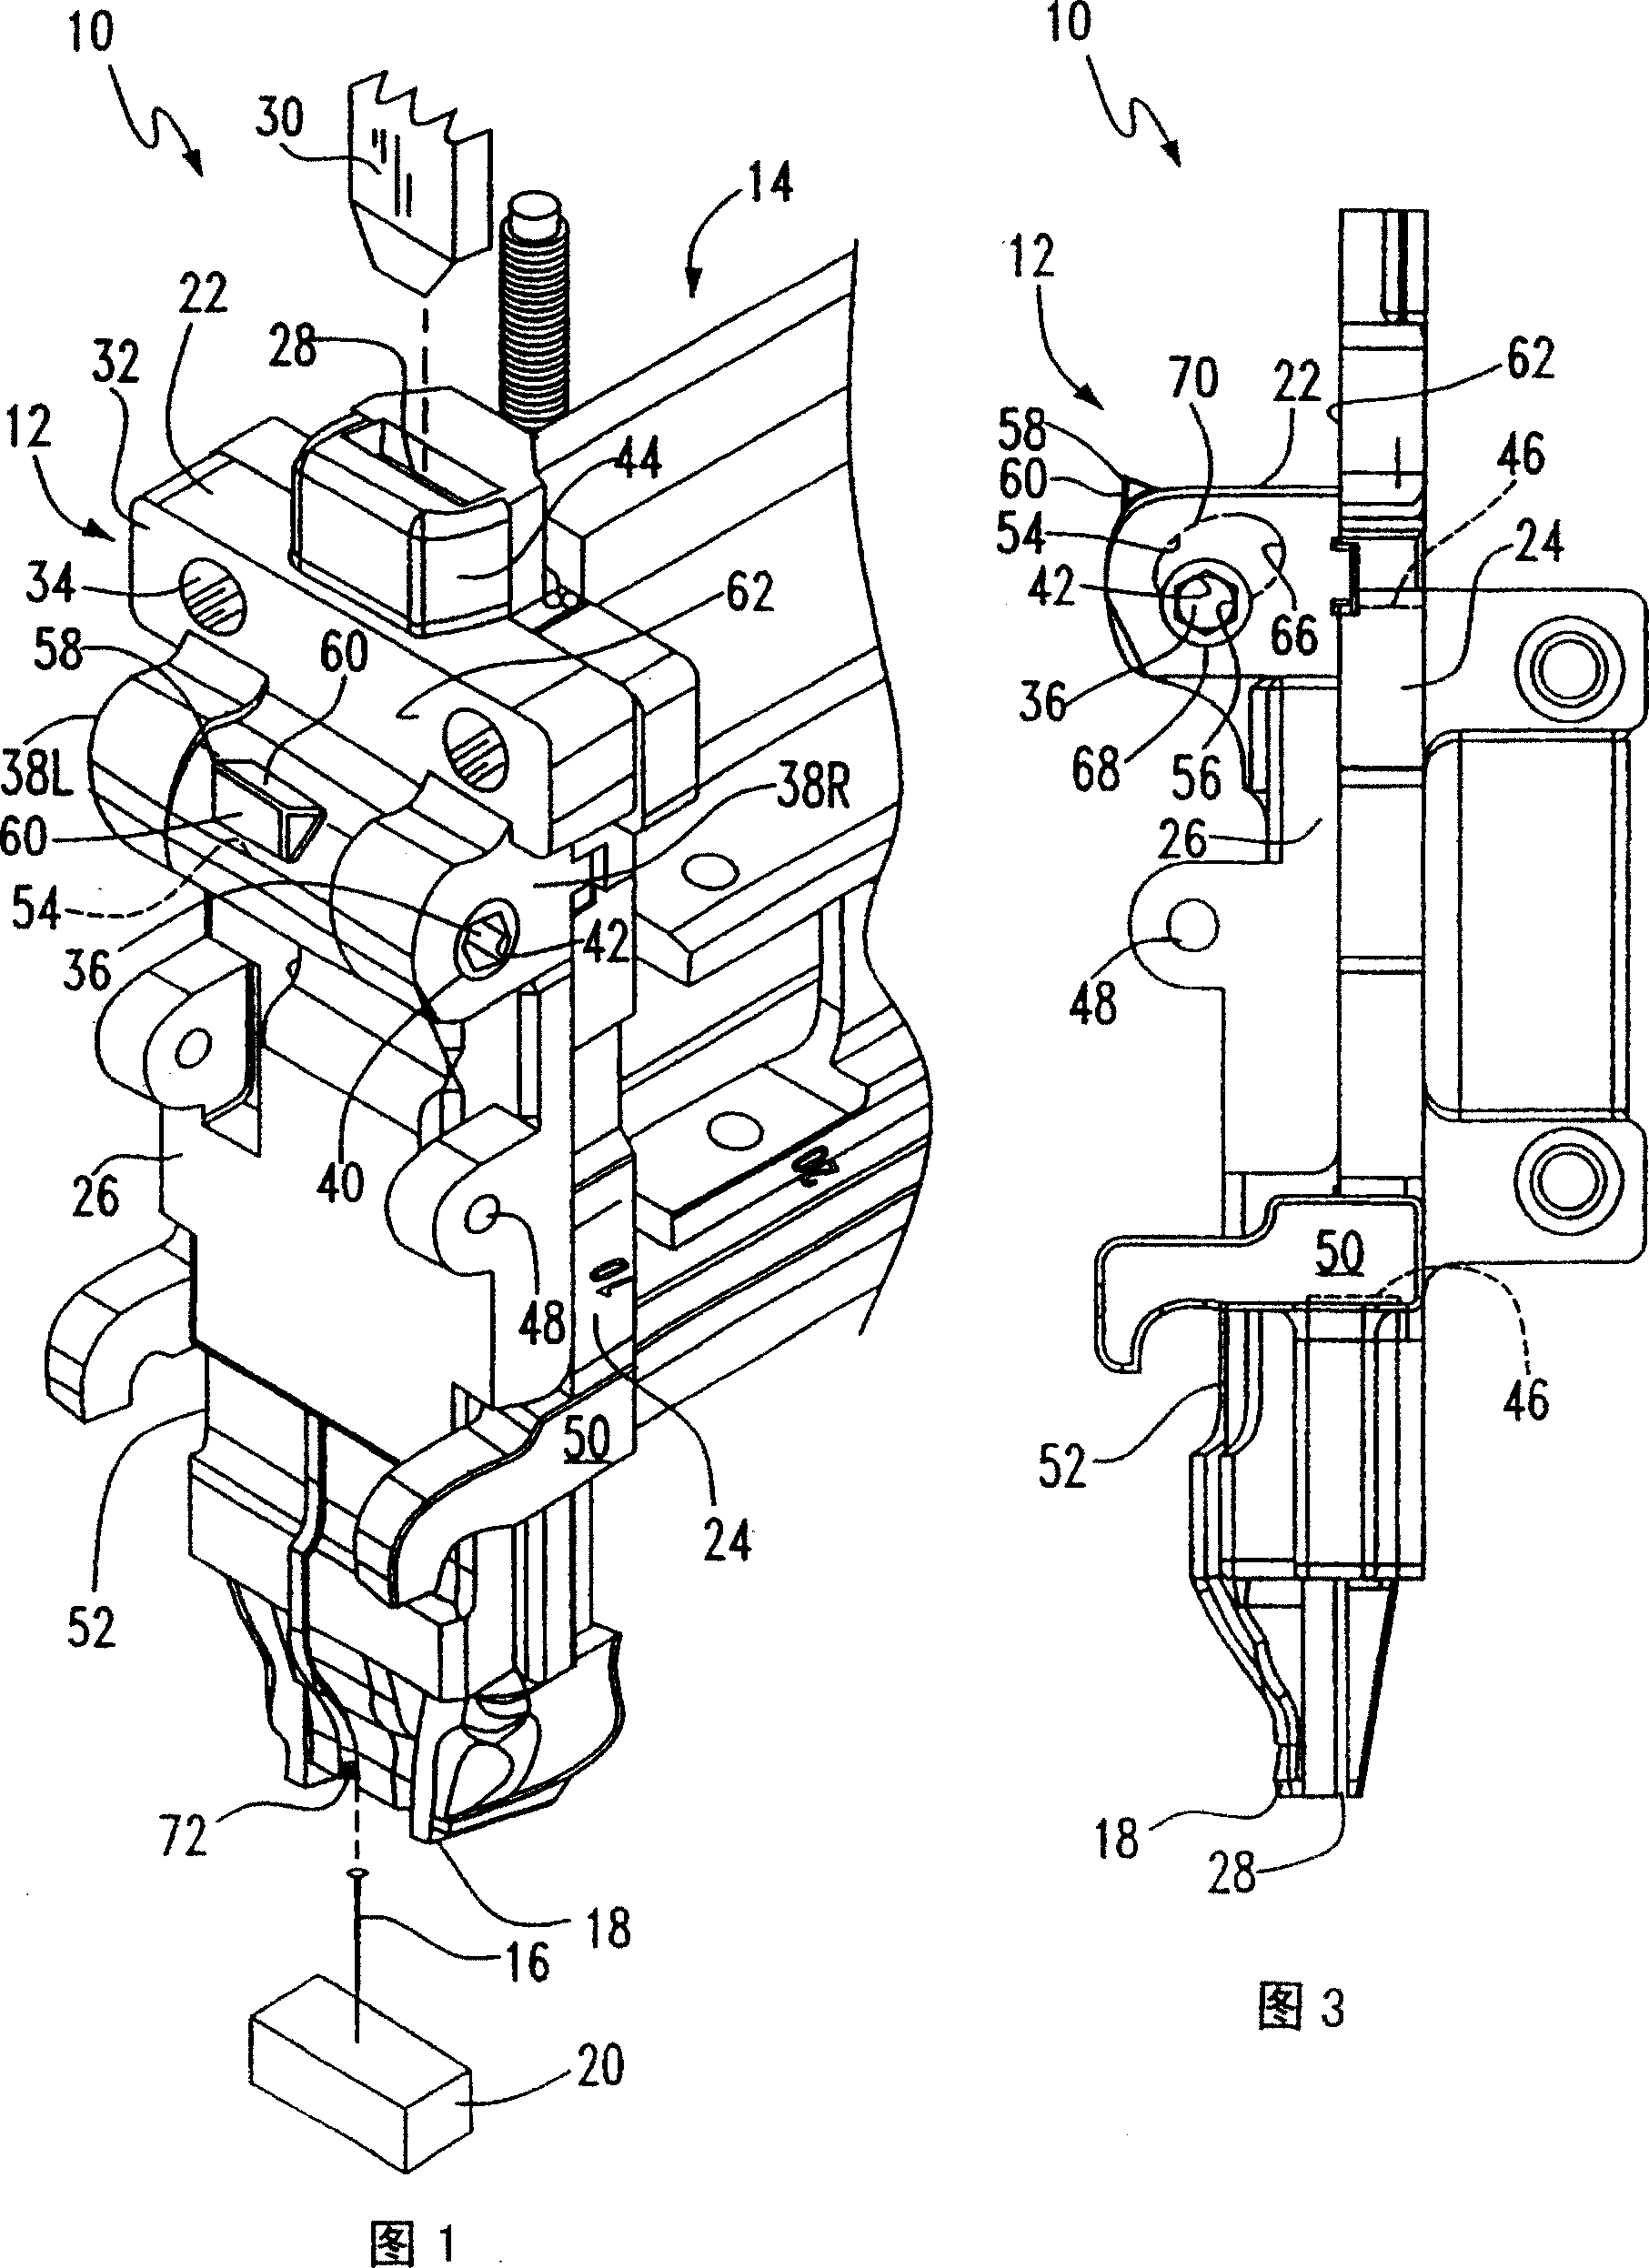 Fitting-up fastenr driving tool